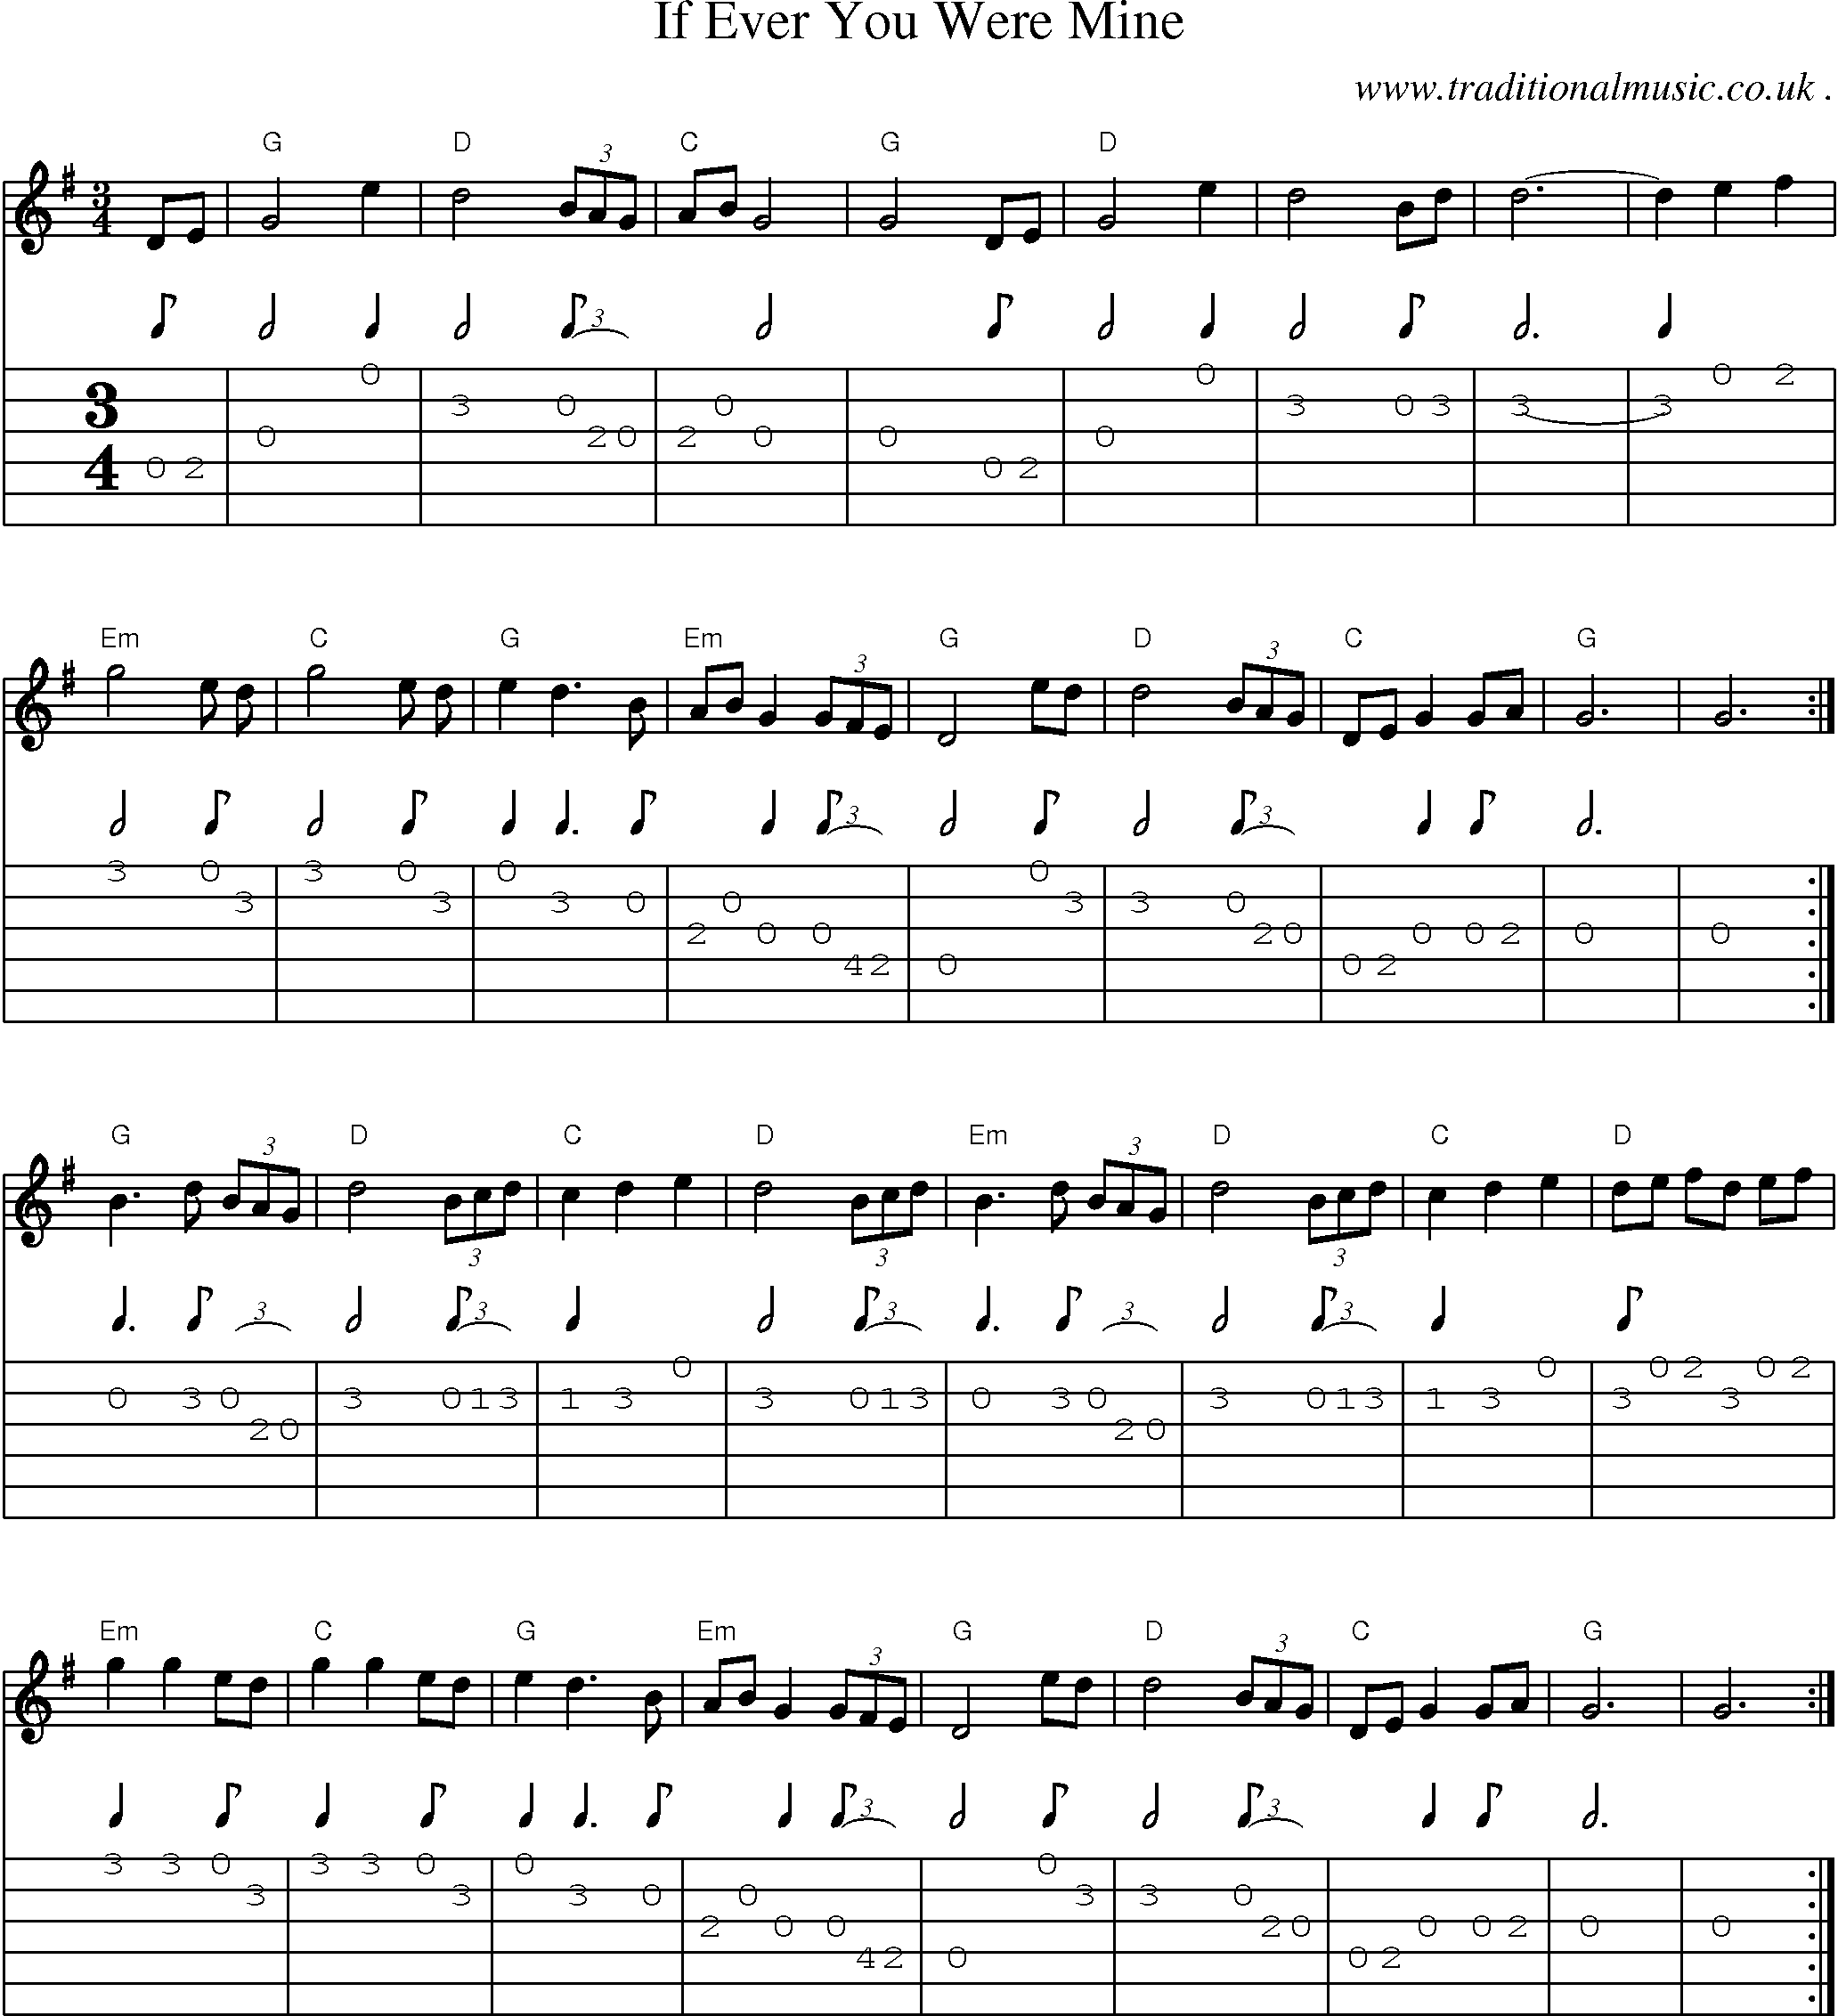 Music Score and Guitar Tabs for If Ever You Were Mine